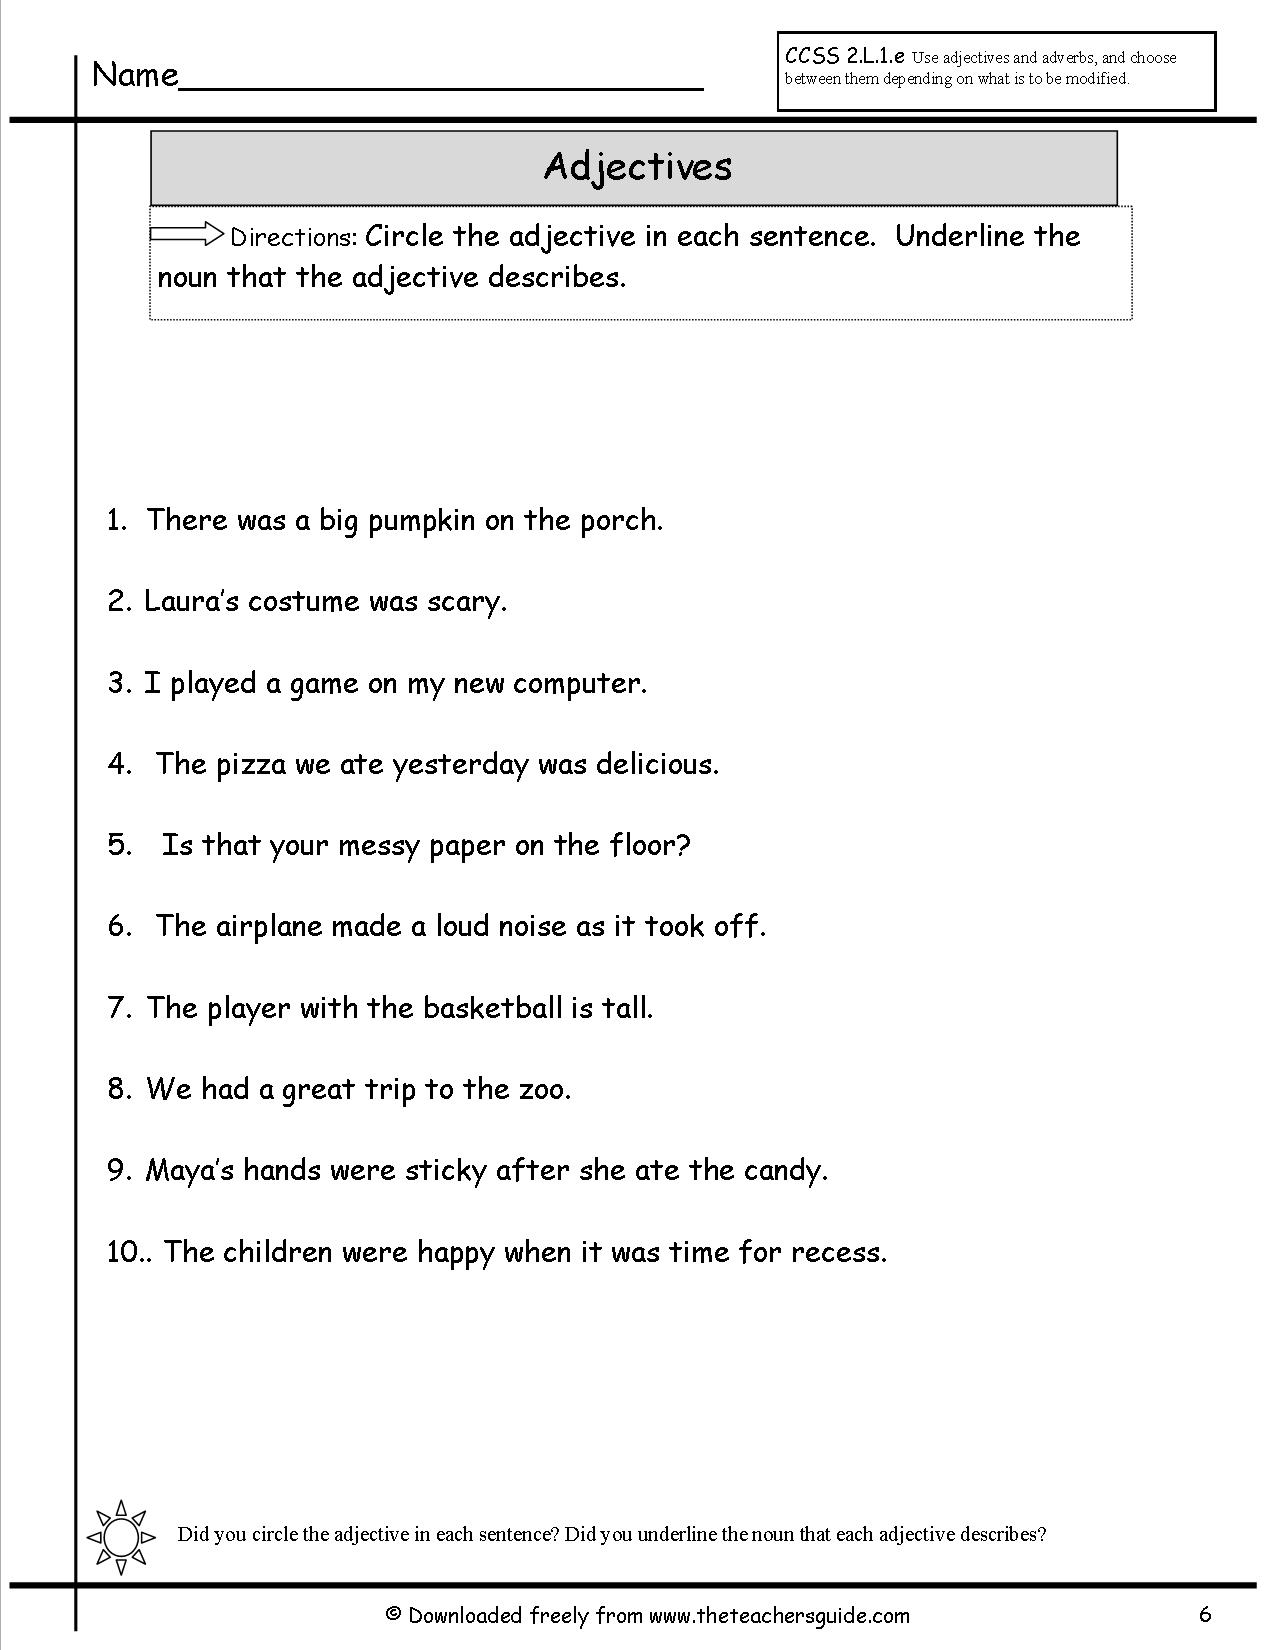 15 Best Images Of Nouns And Adjectives Worksheets Identifying Nouns 